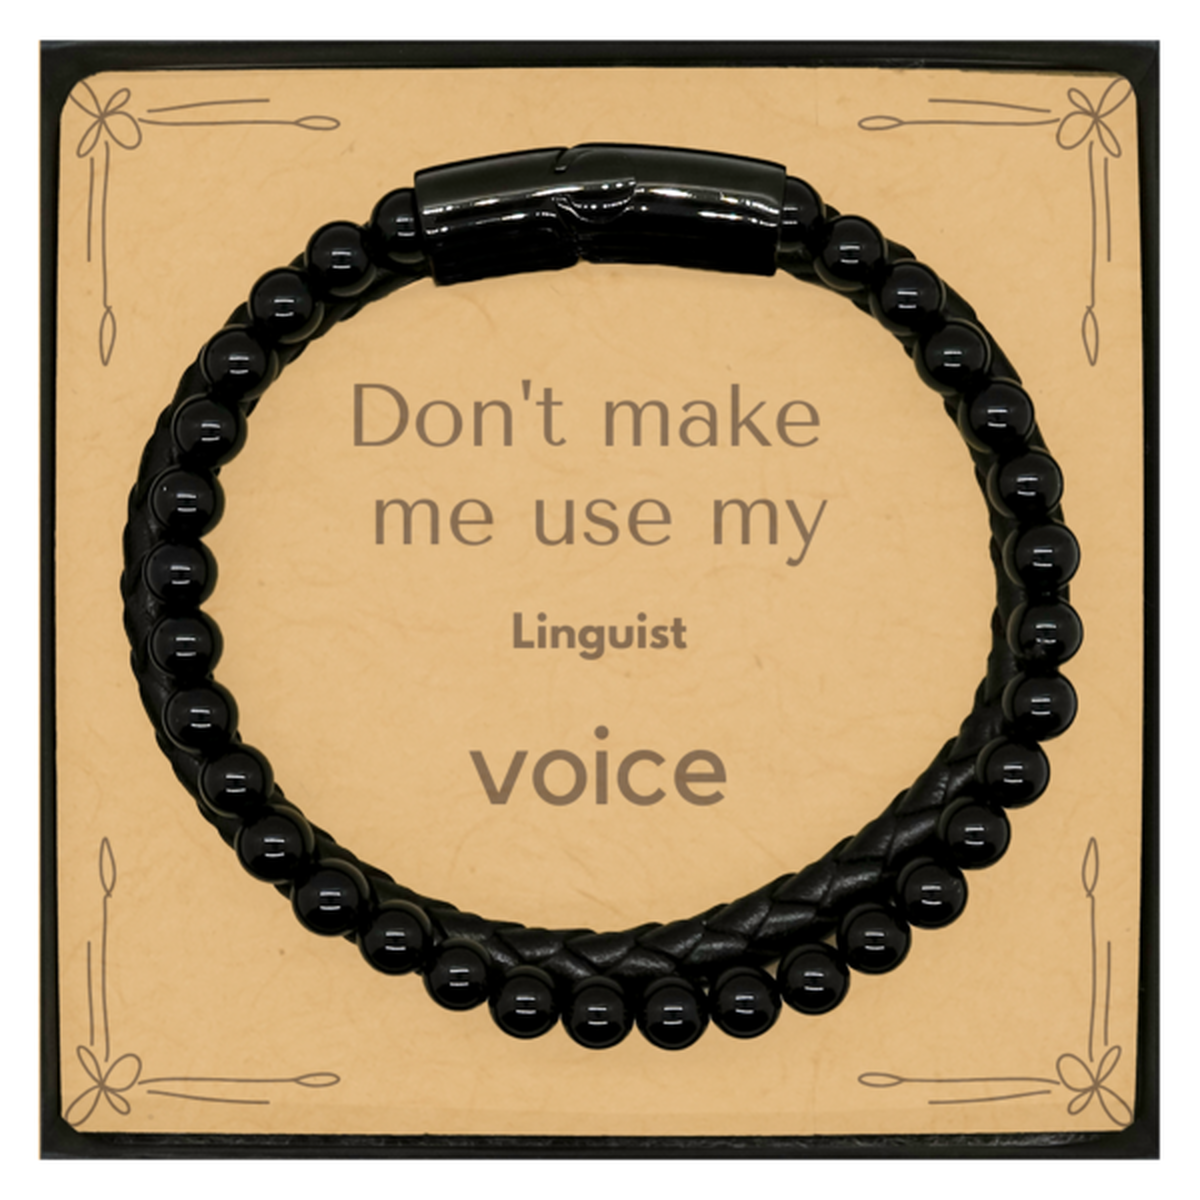 Don't make me use my Linguist voice, Sarcasm Linguist Card Gifts, Christmas Linguist Stone Leather Bracelets Birthday Unique Gifts For Linguist Coworkers, Men, Women, Colleague, Friends